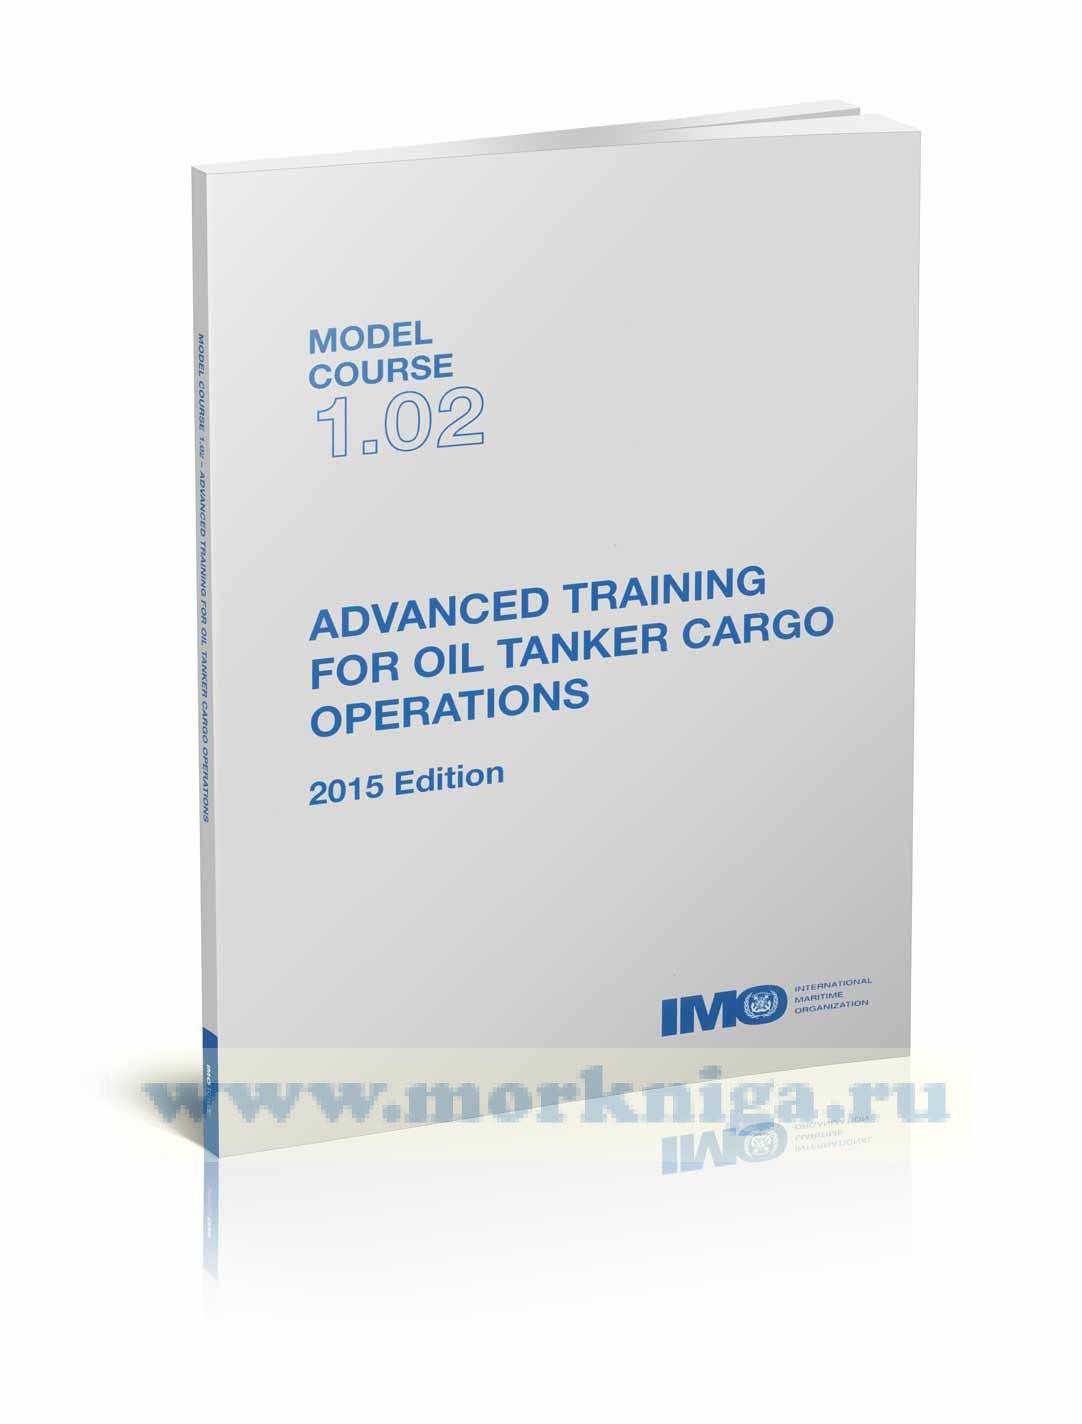 Advanced training for oil tanker cargo operations. Model course 1.02. 2015 Edition